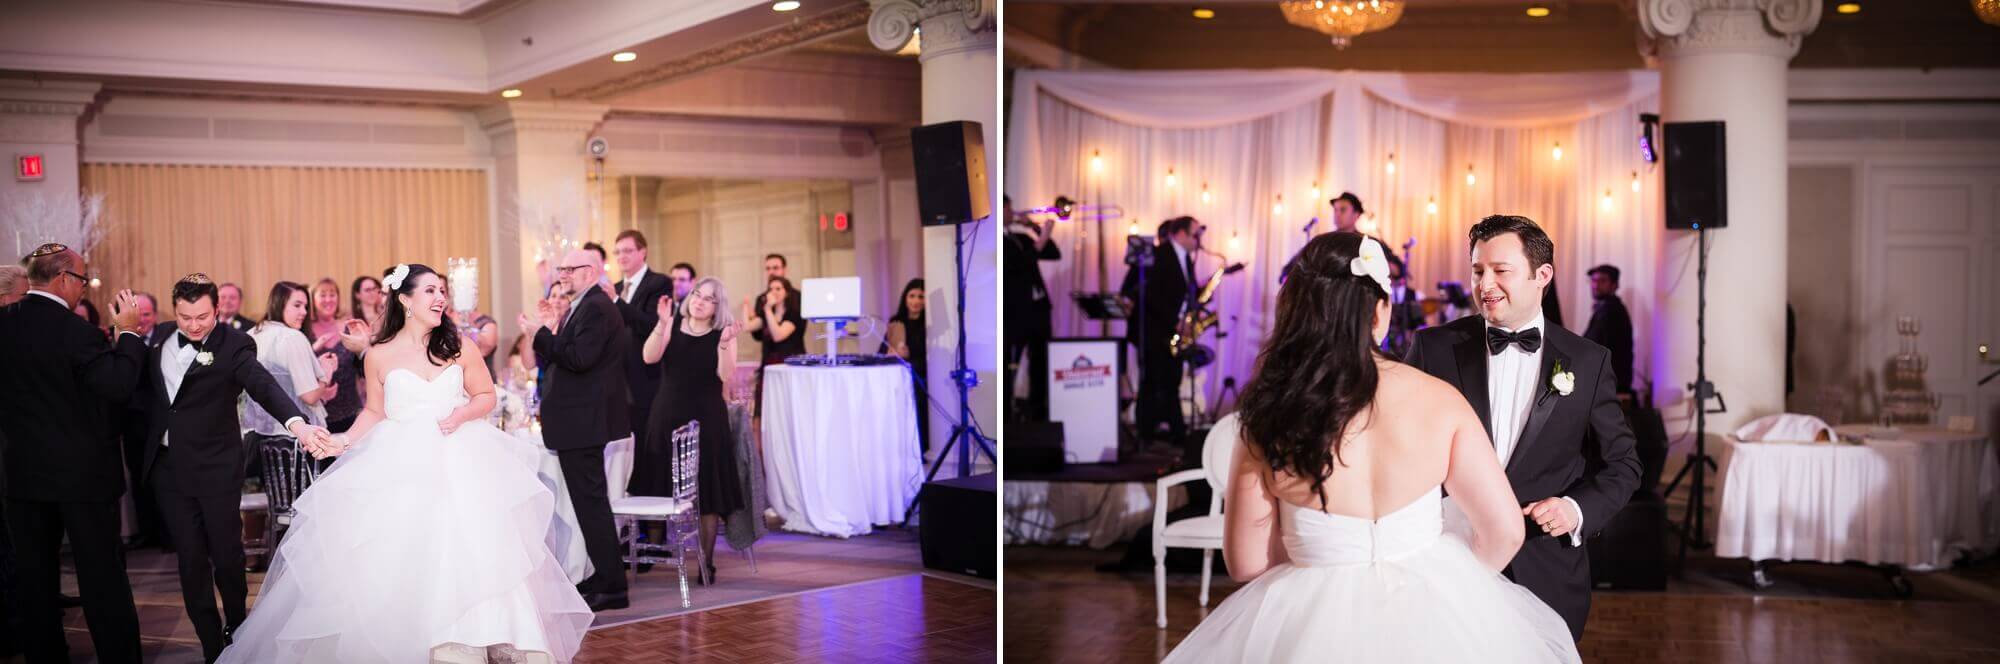 Portrait of the bride and groom dancing together at the Omni King Edward Hotel in Toronto